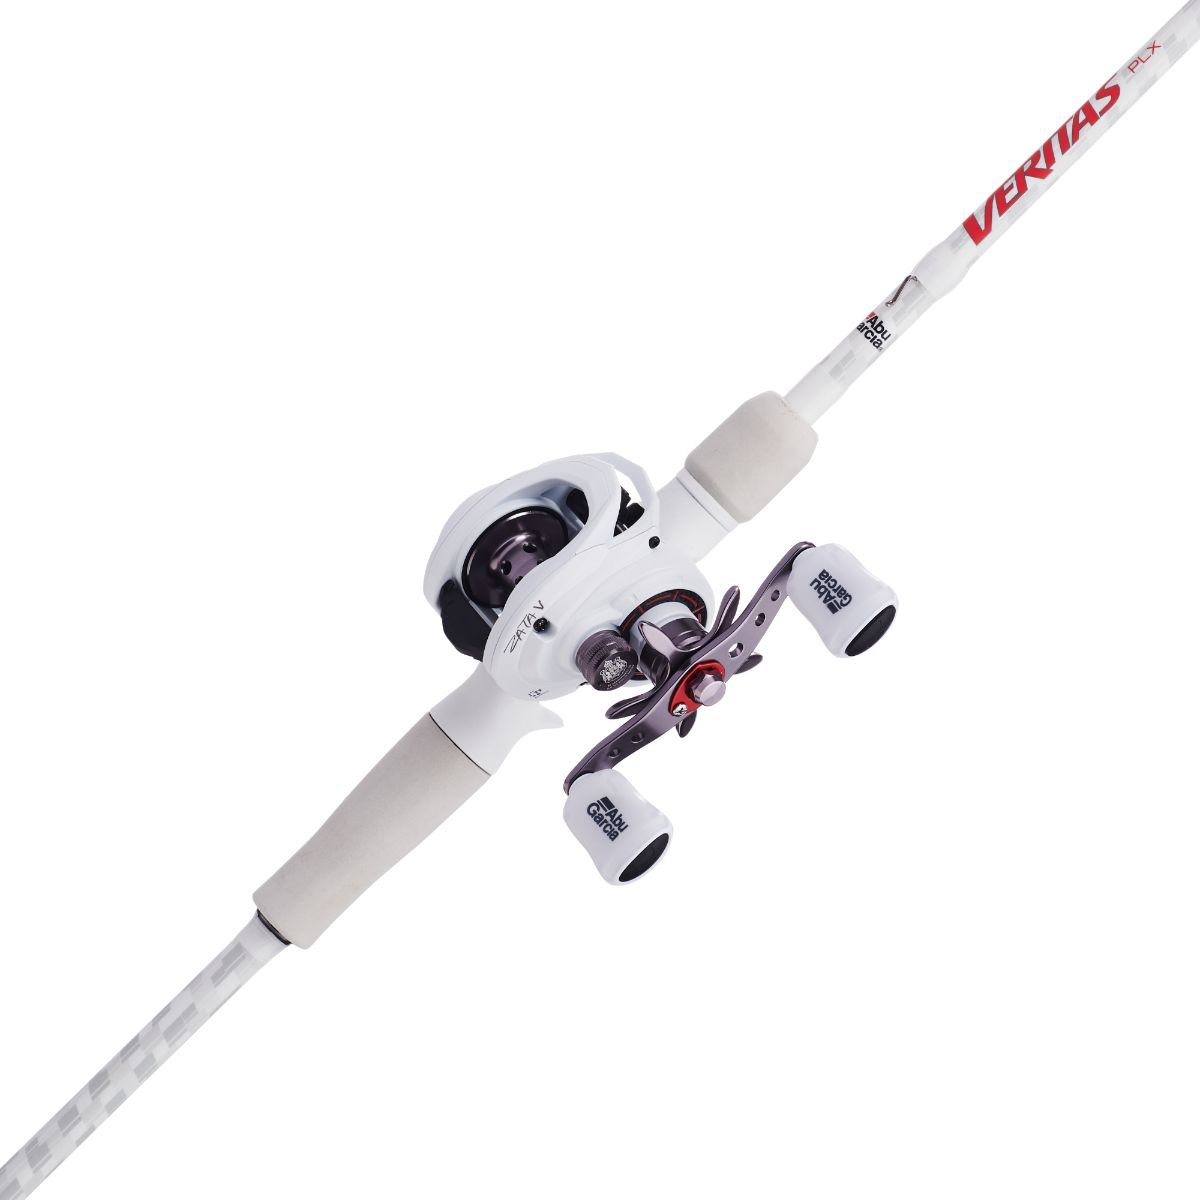 Abu Garcia® Veritas® Rods Get Lighter and Stronger with an